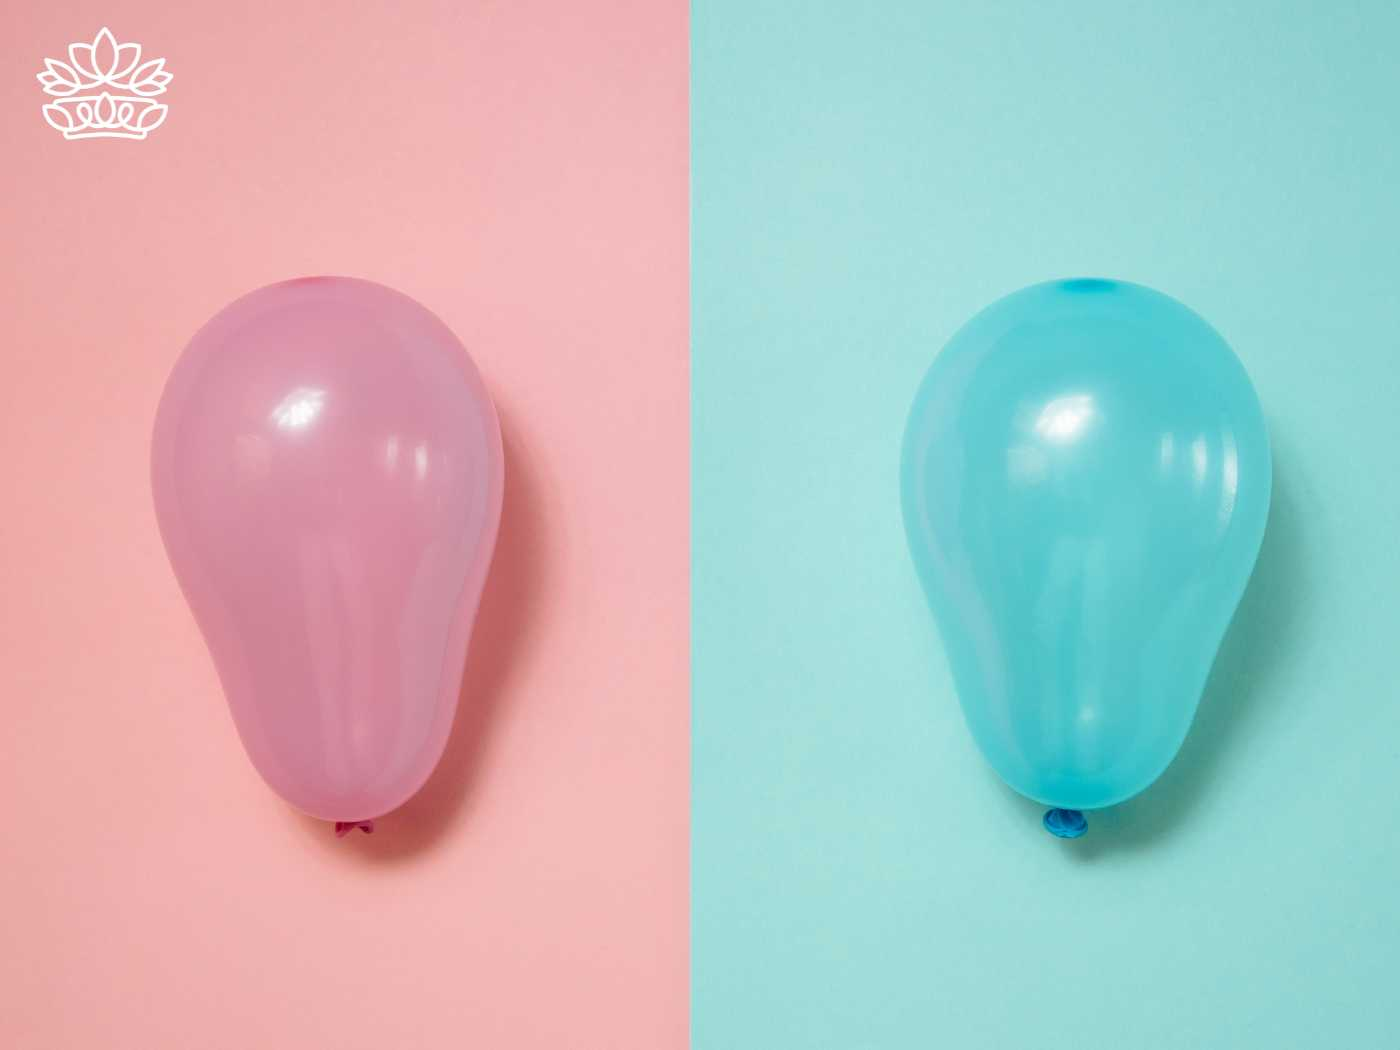 A pink balloon on a pastel pink background and a blue balloon on a pastel blue background, from the Gender Reveal Collection at Fabulous Flowers and Gifts.